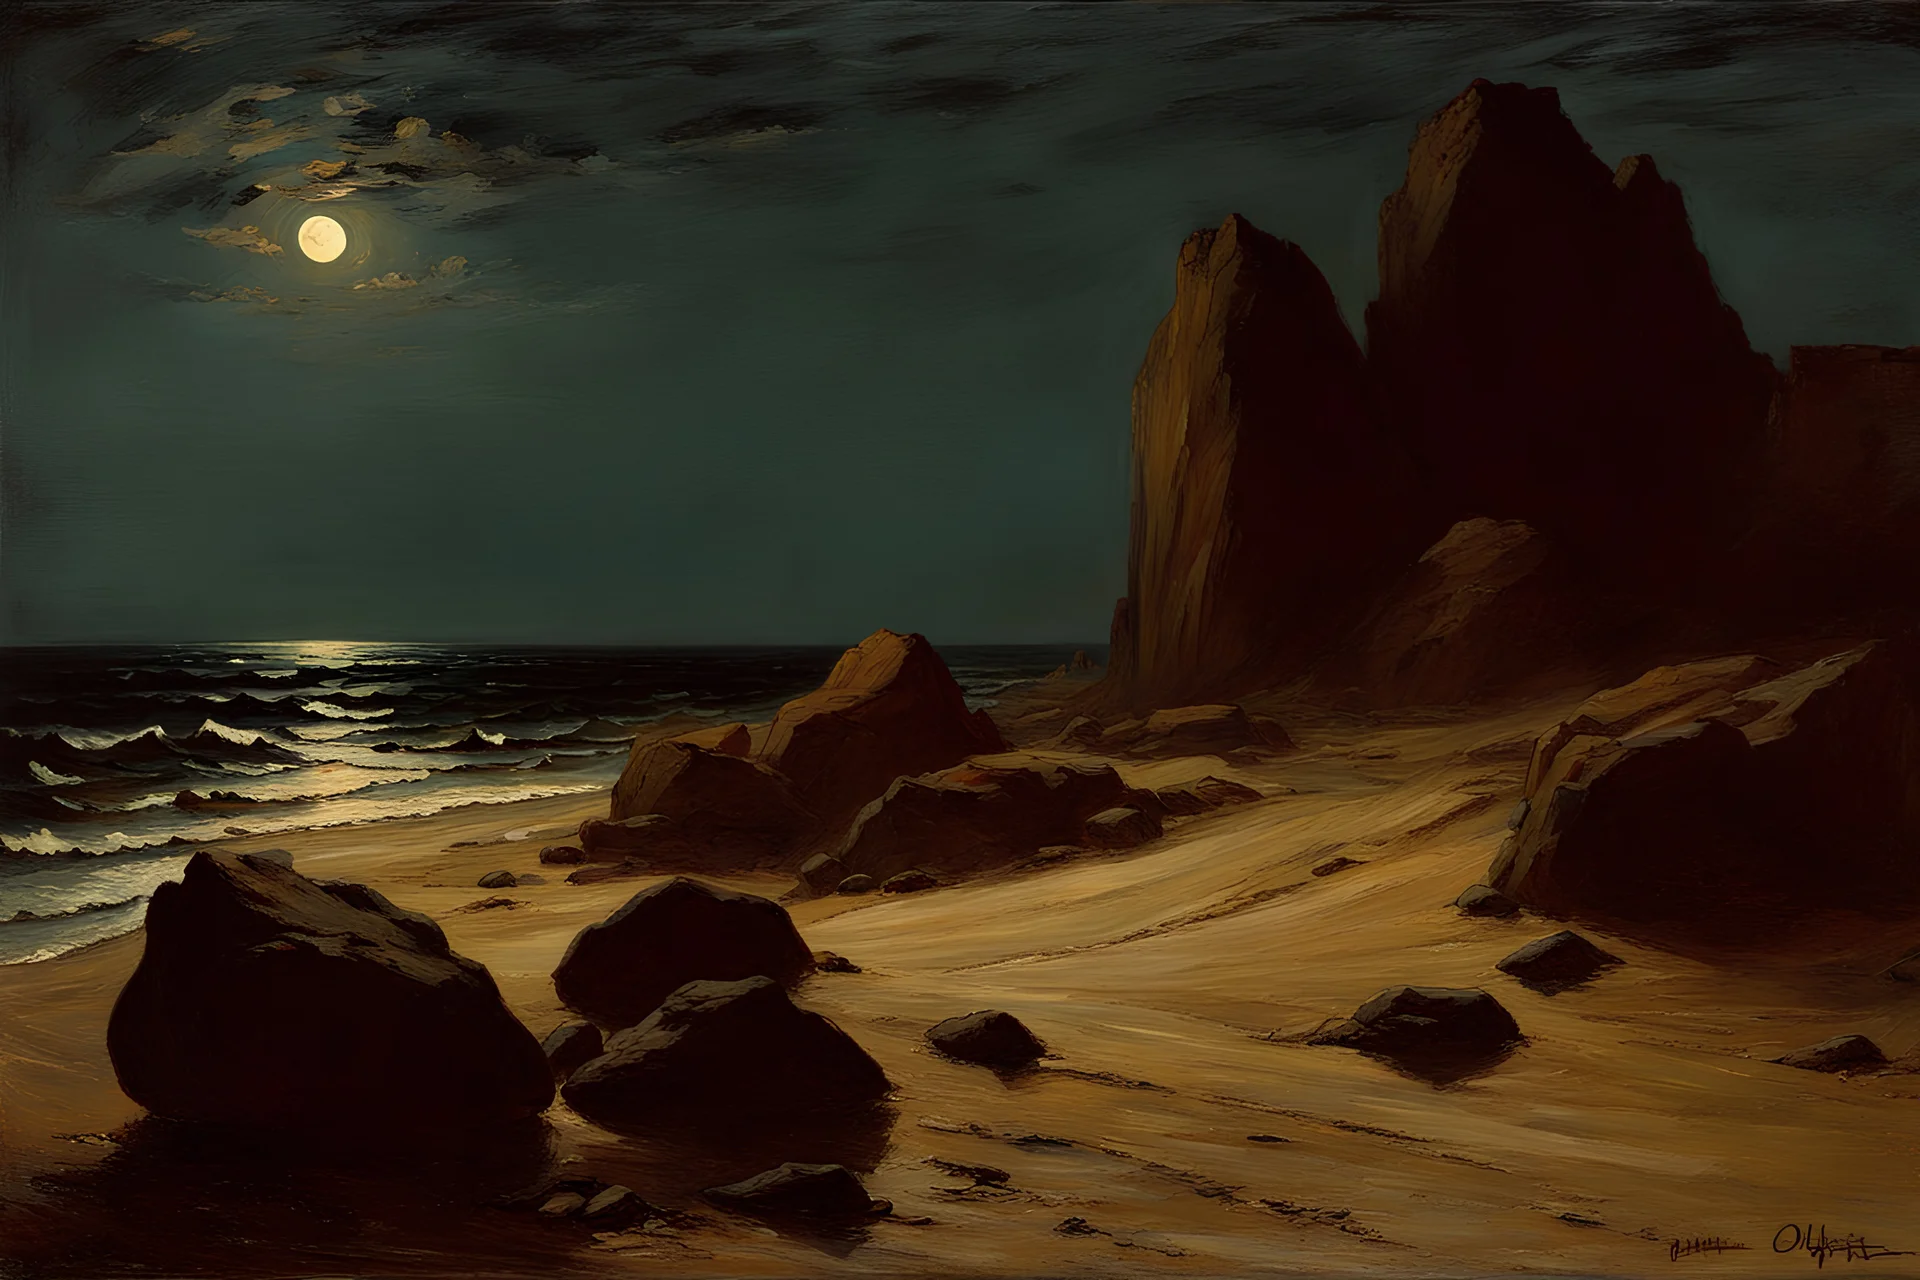 Night, sand, rocks, auguste oleffe and henry luyten impressionism paintings